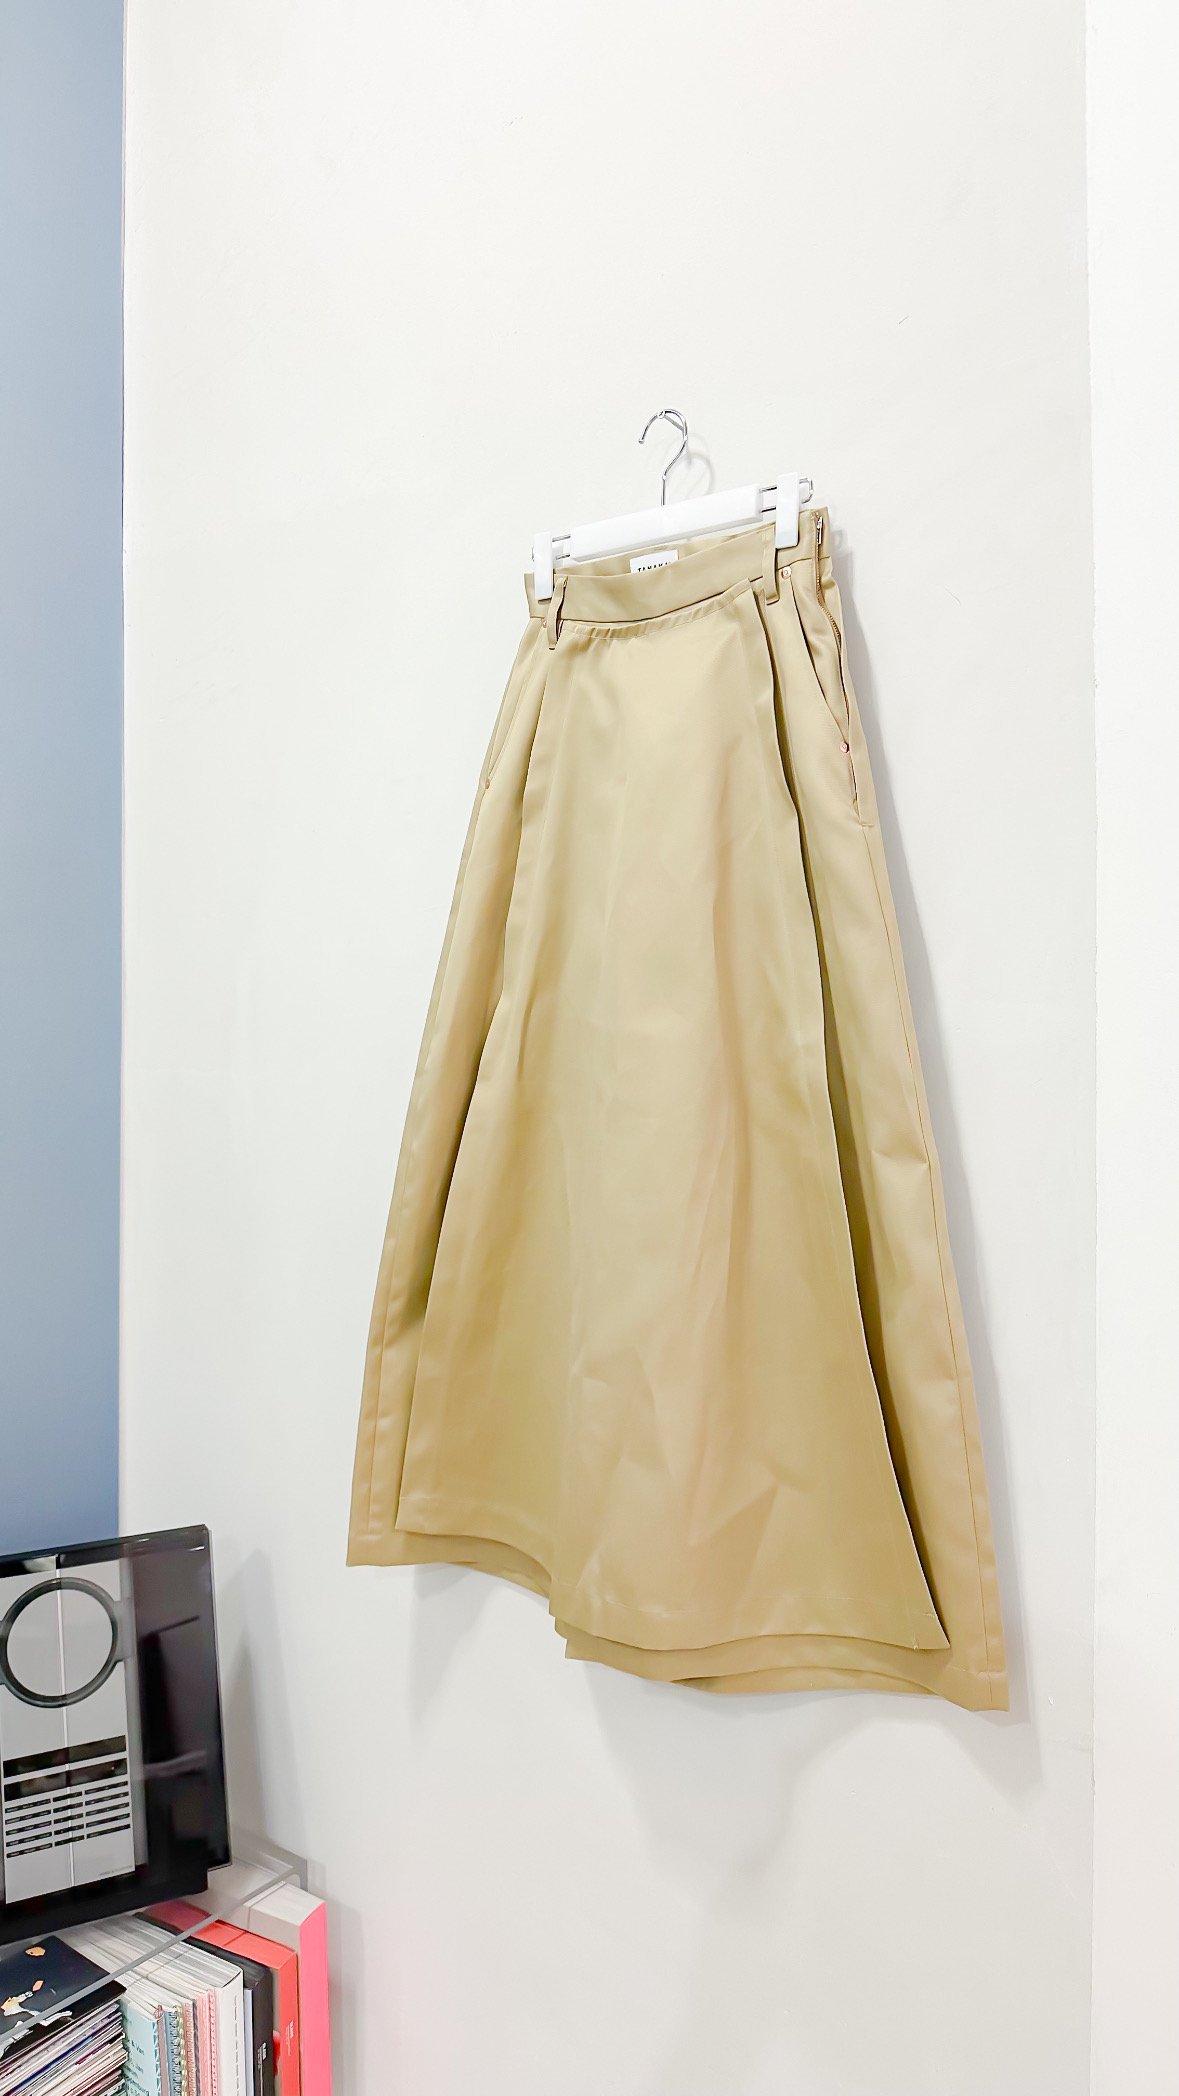 <img class='new_mark_img1' src='https://img.shop-pro.jp/img/new/icons47.gif' style='border:none;display:inline;margin:0px;padding:0px;width:auto;' />THE WIDE SKIRT PANTS